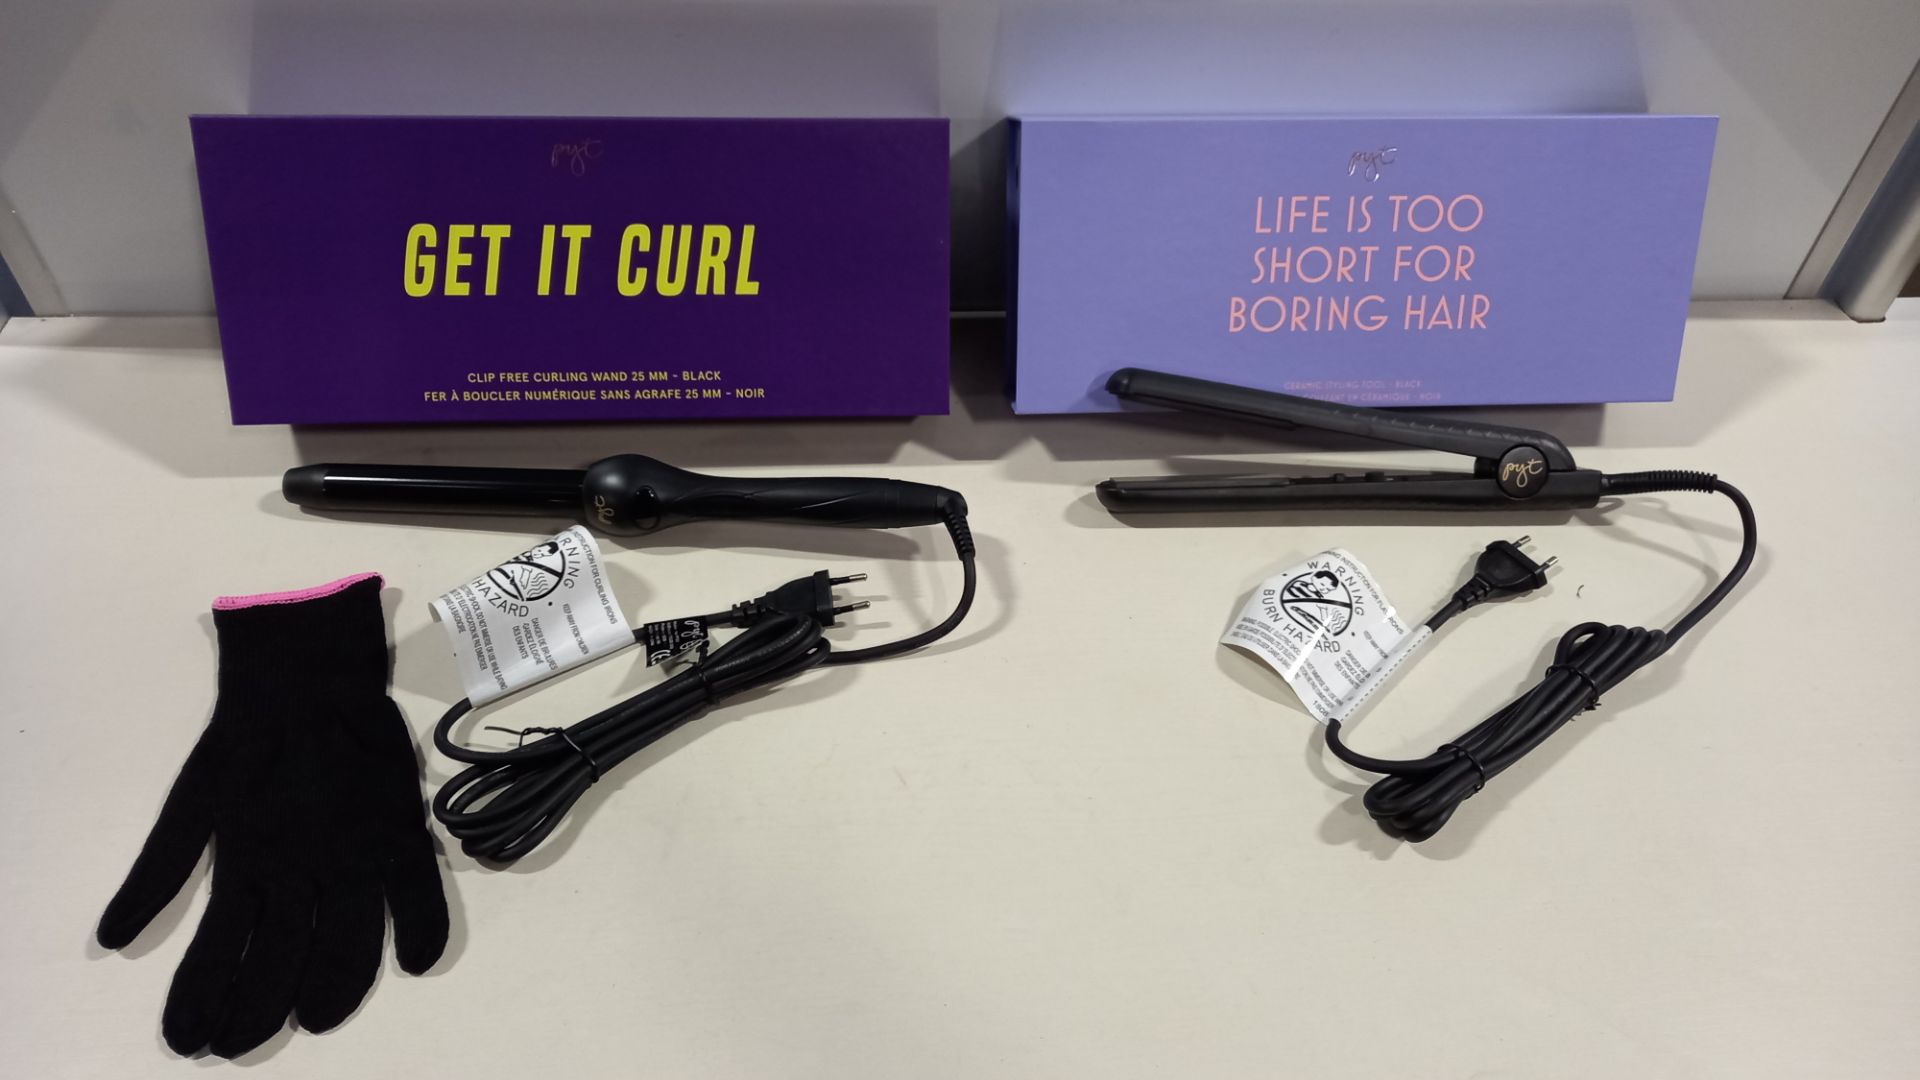 2 X BRAND NEW PYT (PRETTY YOUNG THING) HAIR STYLING TOOLS IE. 1 X STRAIGHTENER TONGUES BLACK, 1 X